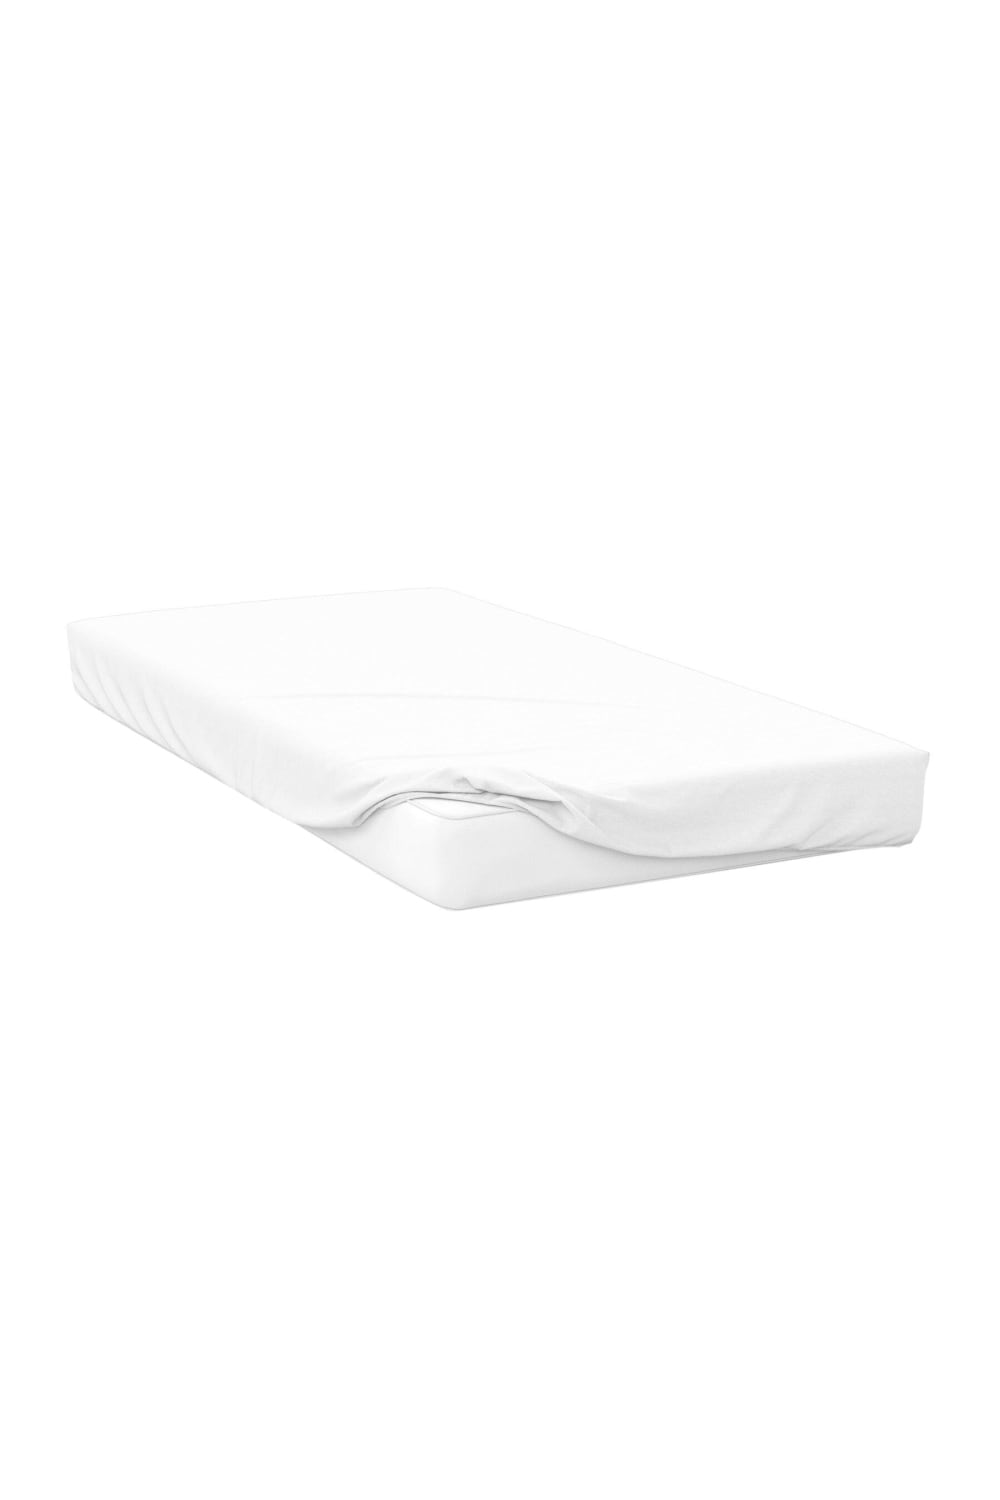 Belledorm 200 Thread Count Cotton Percale Deep Fitted Sheet (White) (Queen) (UK - Kingsize)